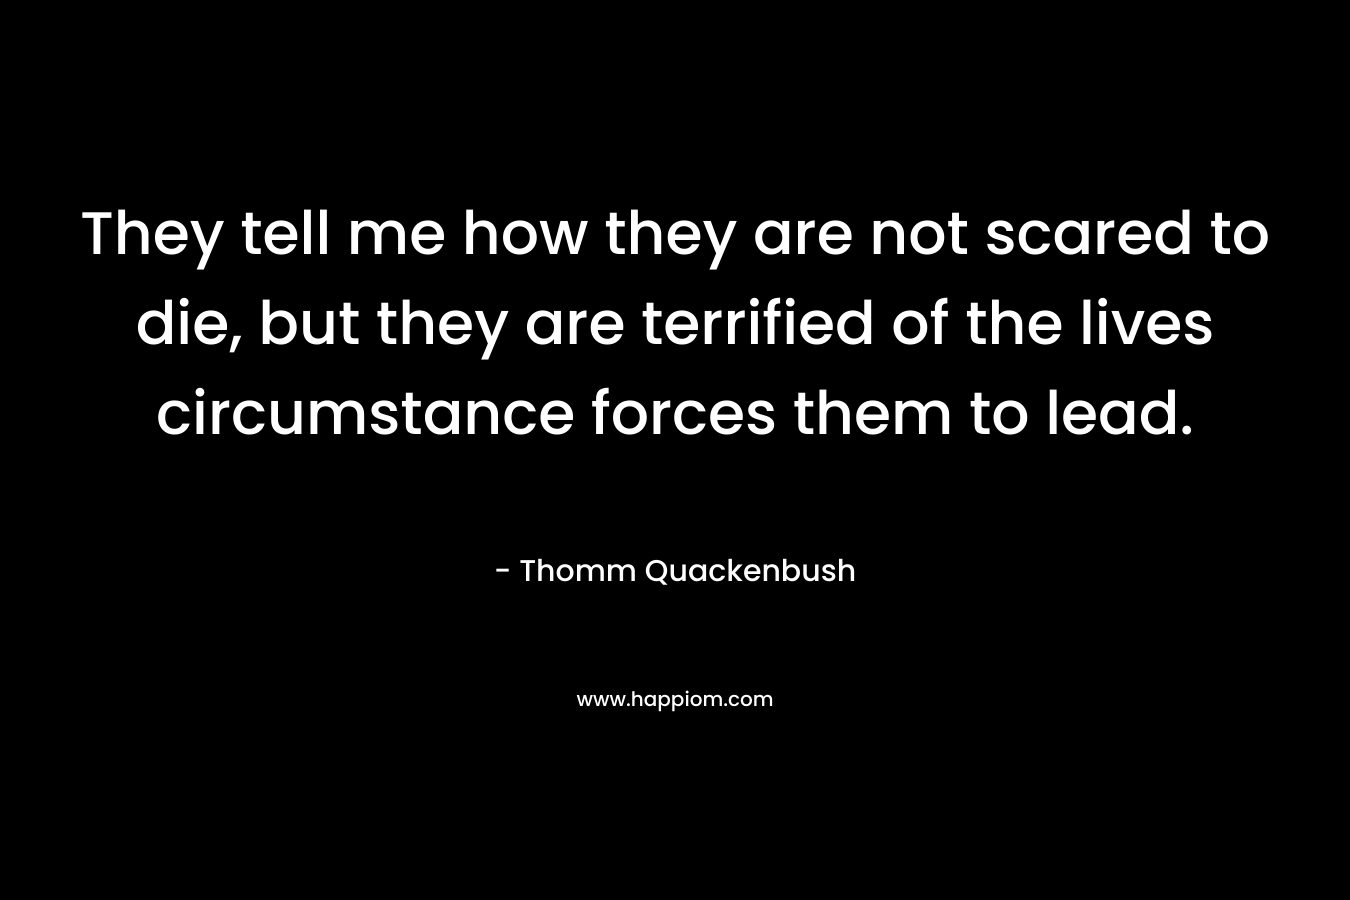 They tell me how they are not scared to die, but they are terrified of the lives circumstance forces them to lead. – Thomm Quackenbush